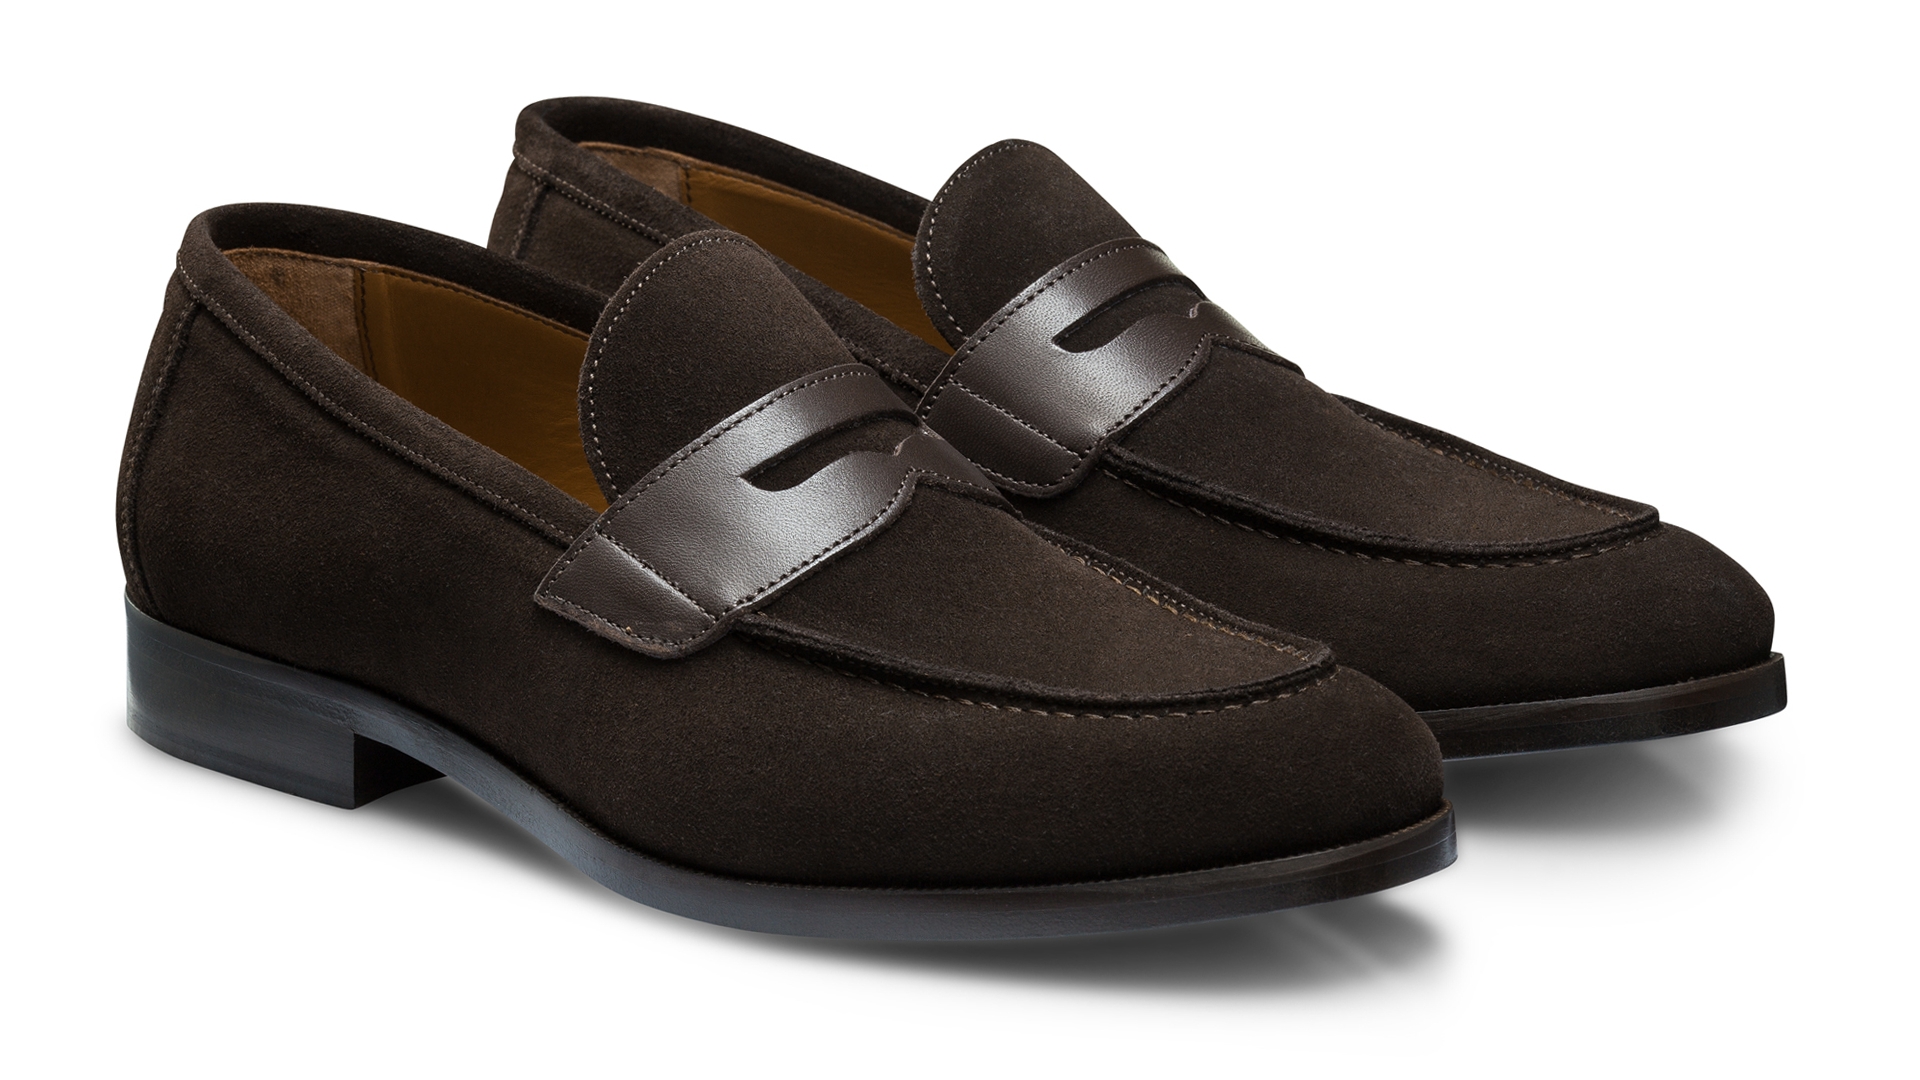 PENNY LOAFERS DARK BROWN SUEDE